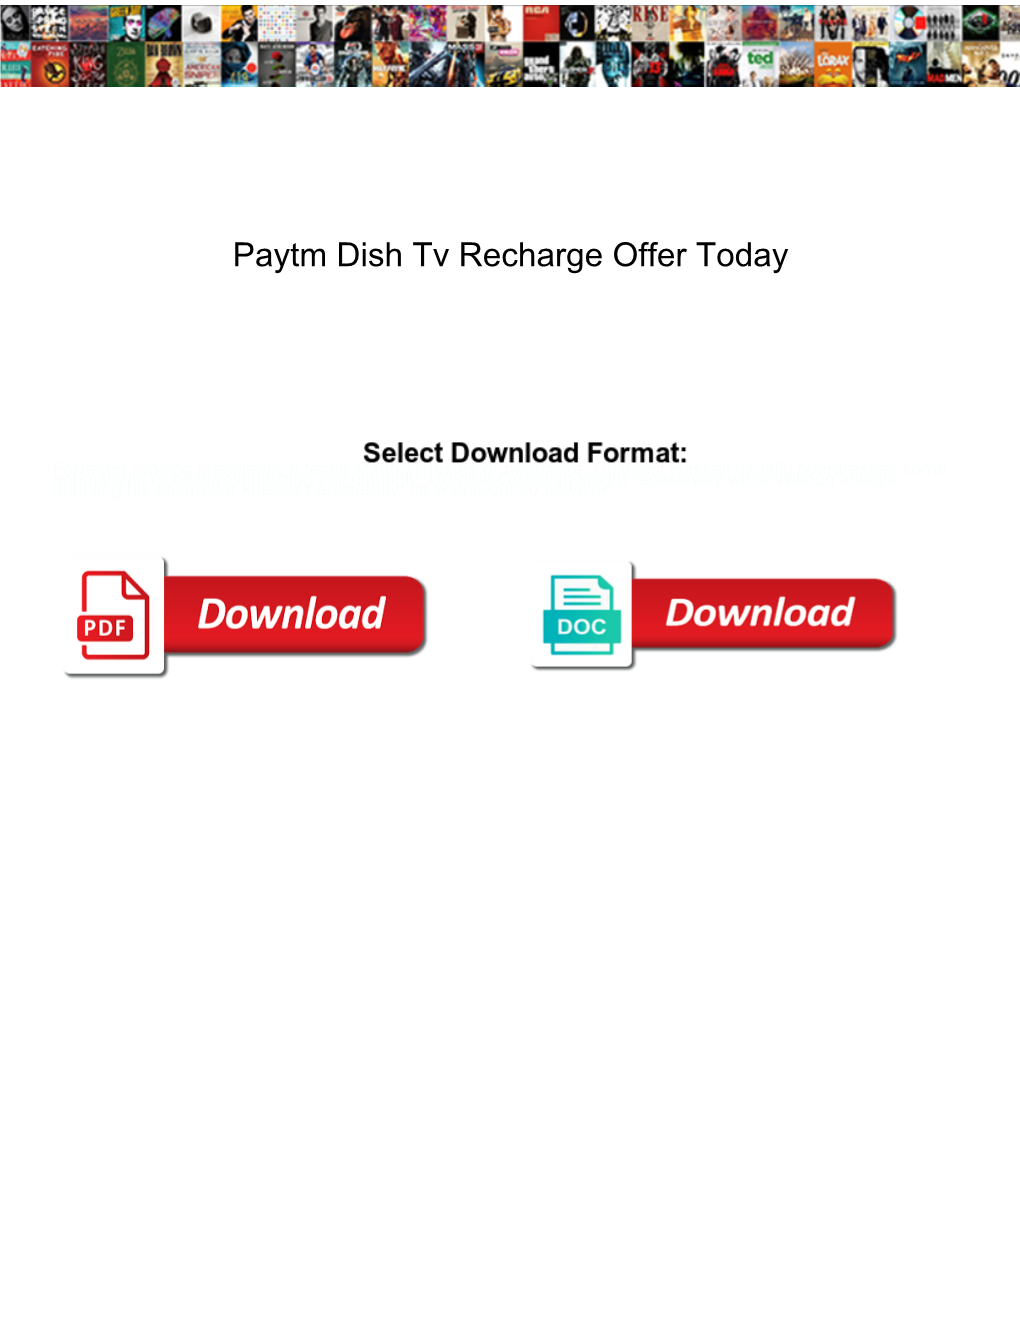 Paytm Dish Tv Recharge Offer Today